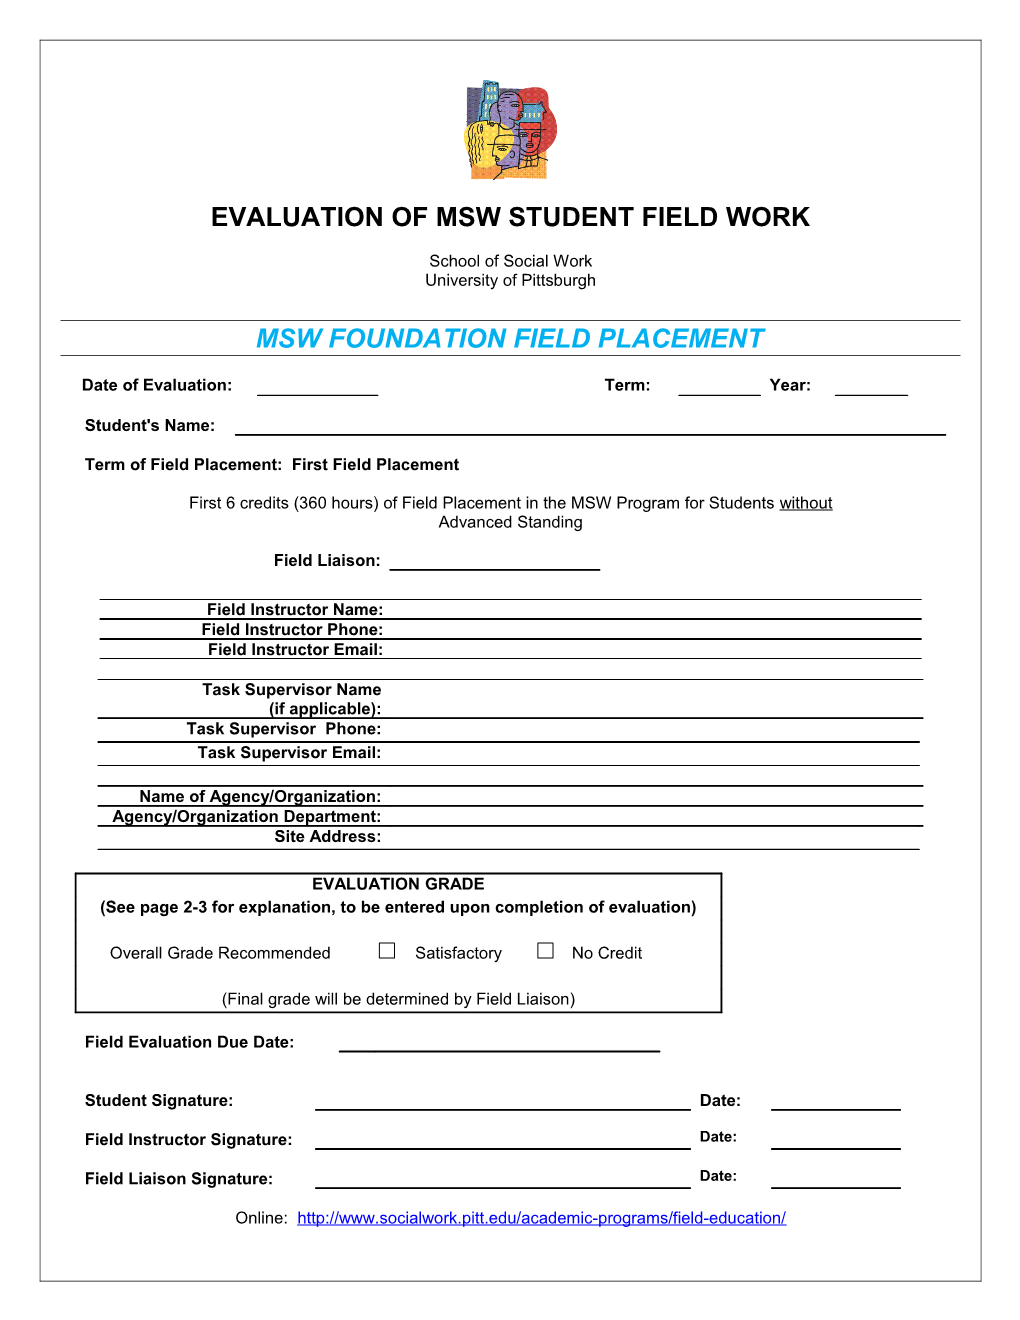 Evaluation of Msw Student Field Work